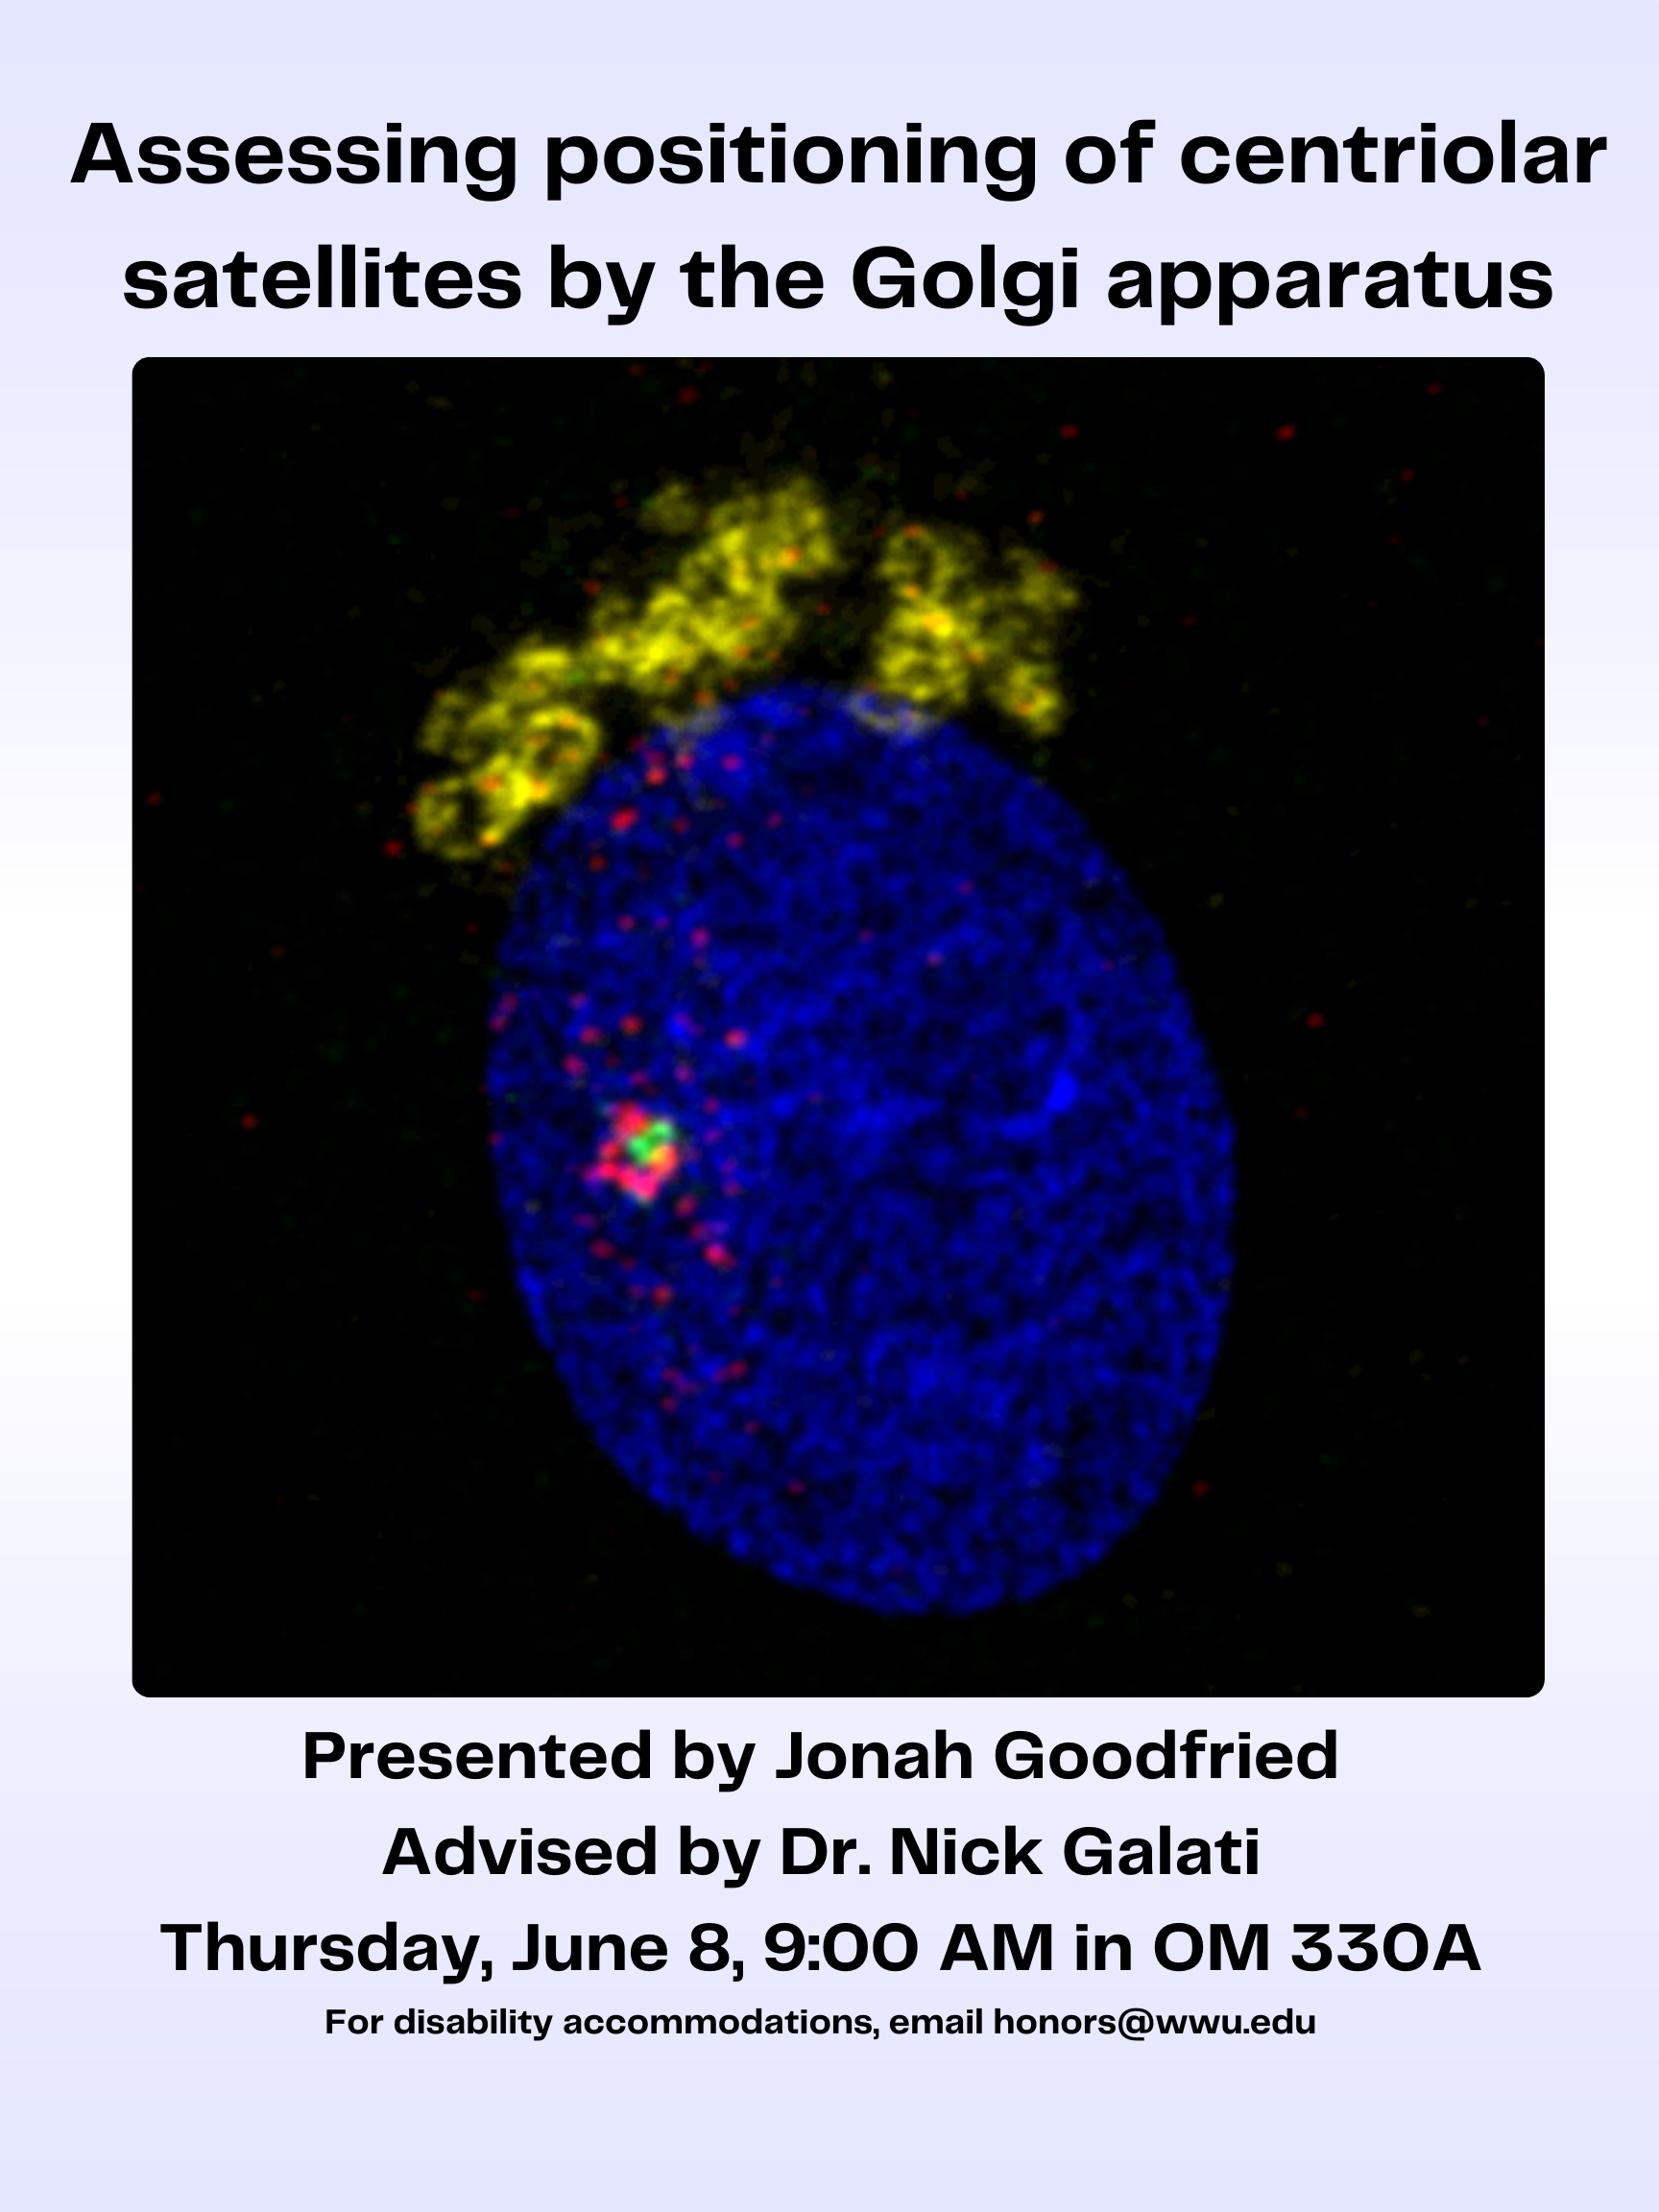 A poster with an image of a human cell with the nucleus in blue, Golgi apparatus in yellow, centrosome in green, and satellite protein PCM1 in red. Text reads: "Assessing positioning of centriolar satellites by the Golgi apparatus. Presented by Jonah Goodfried; Advised by Dr. Nick Galati; Thursday, June 8, 9:00 A.M. in OM 330A; For disability accommodations, email honors@wwu.edu."